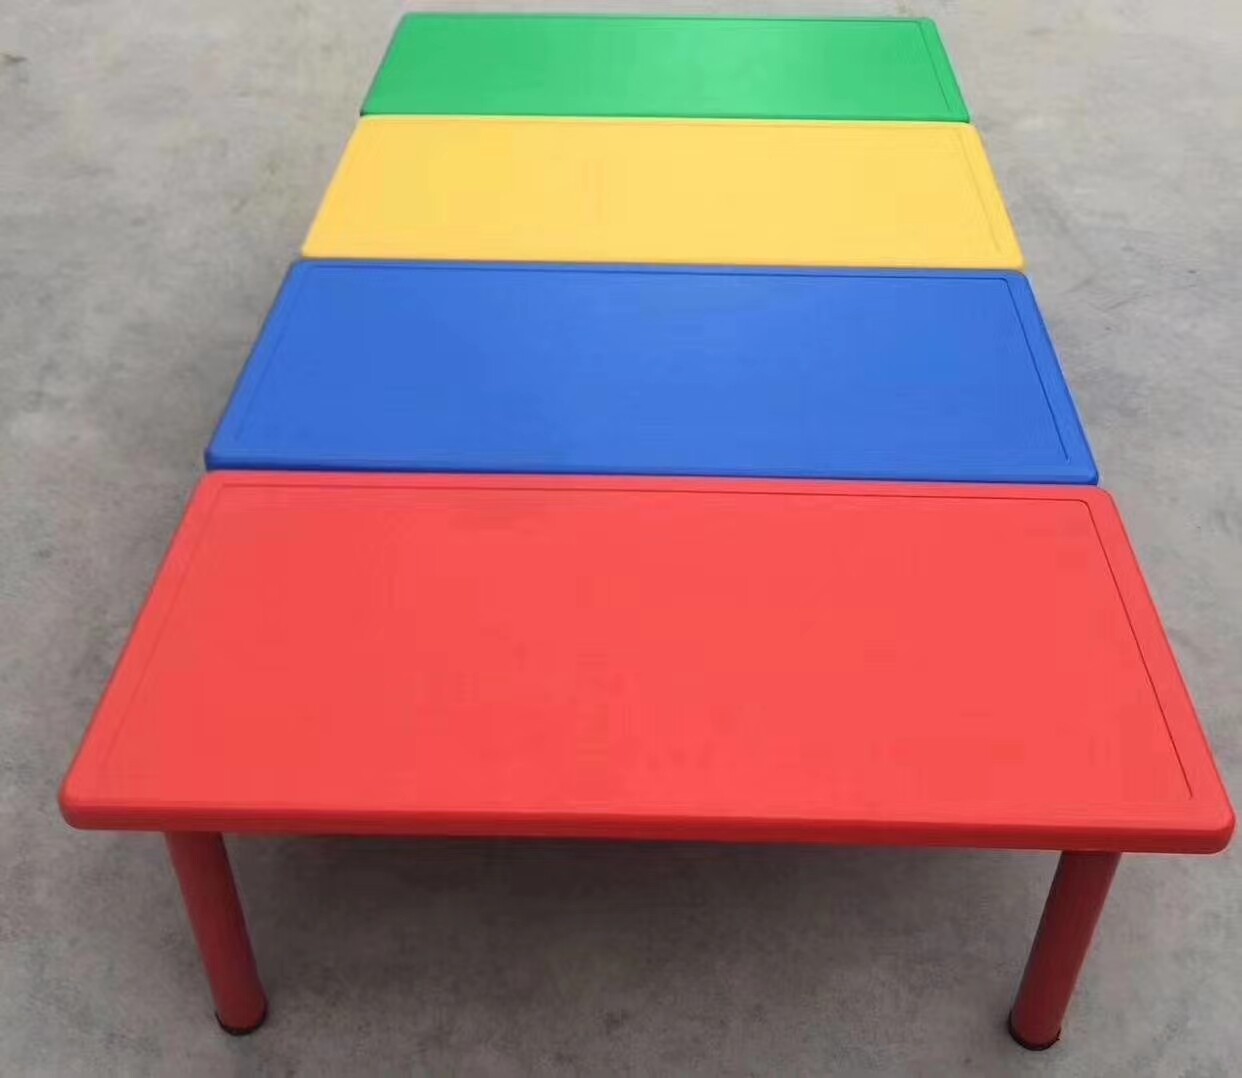 Table mold on sell.